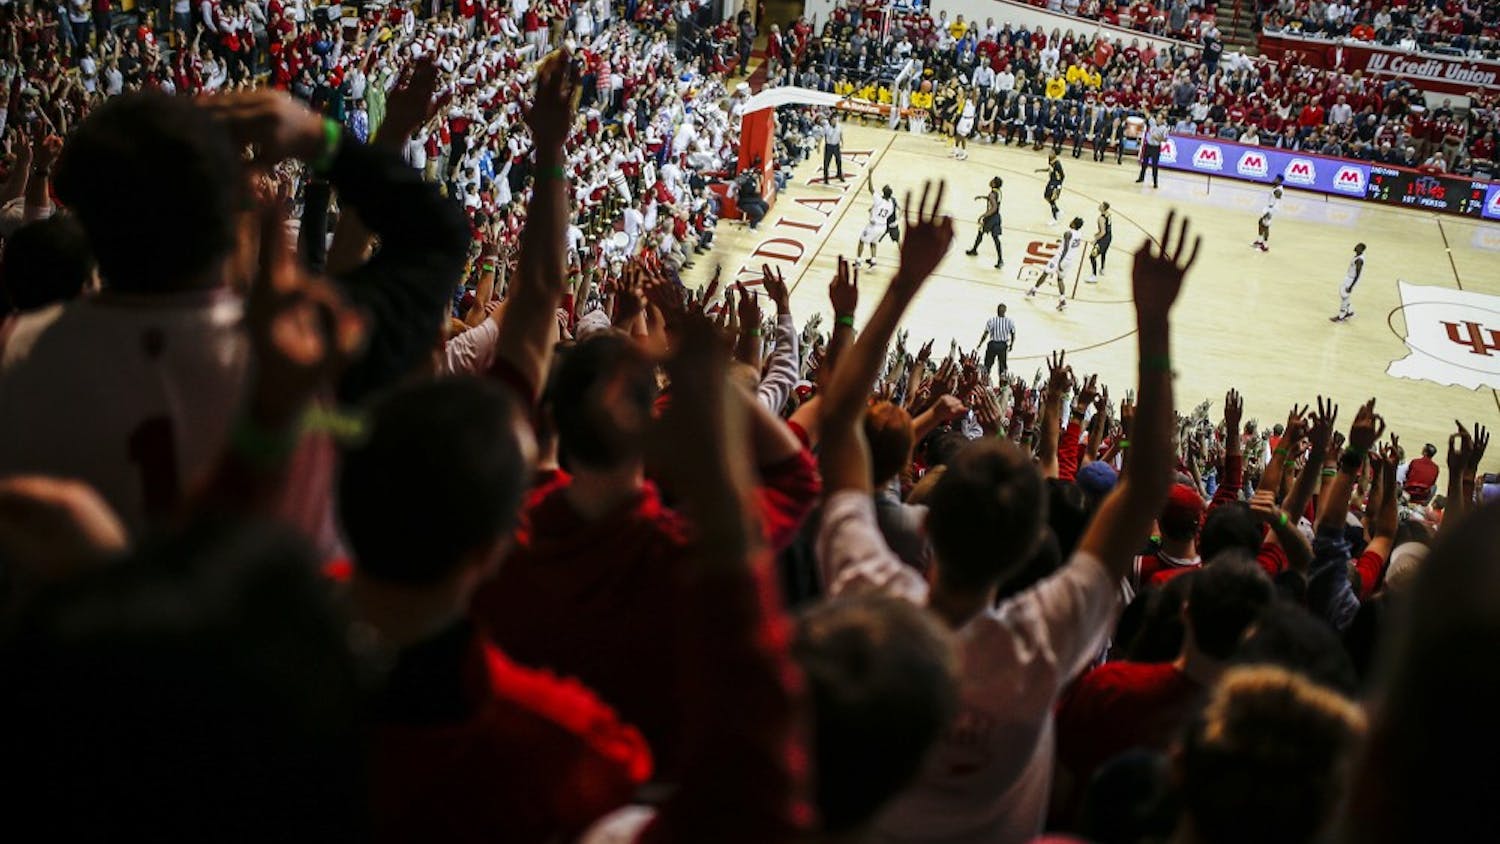 The Indiana student section reacts to a shot during the Hoosiers' game against the Iowa Hawkeyes in Simon Skjodt Assembly Hall on Dec. 4. The 2018 version of Hoosier Hysteria takes place Saturday afternoon.